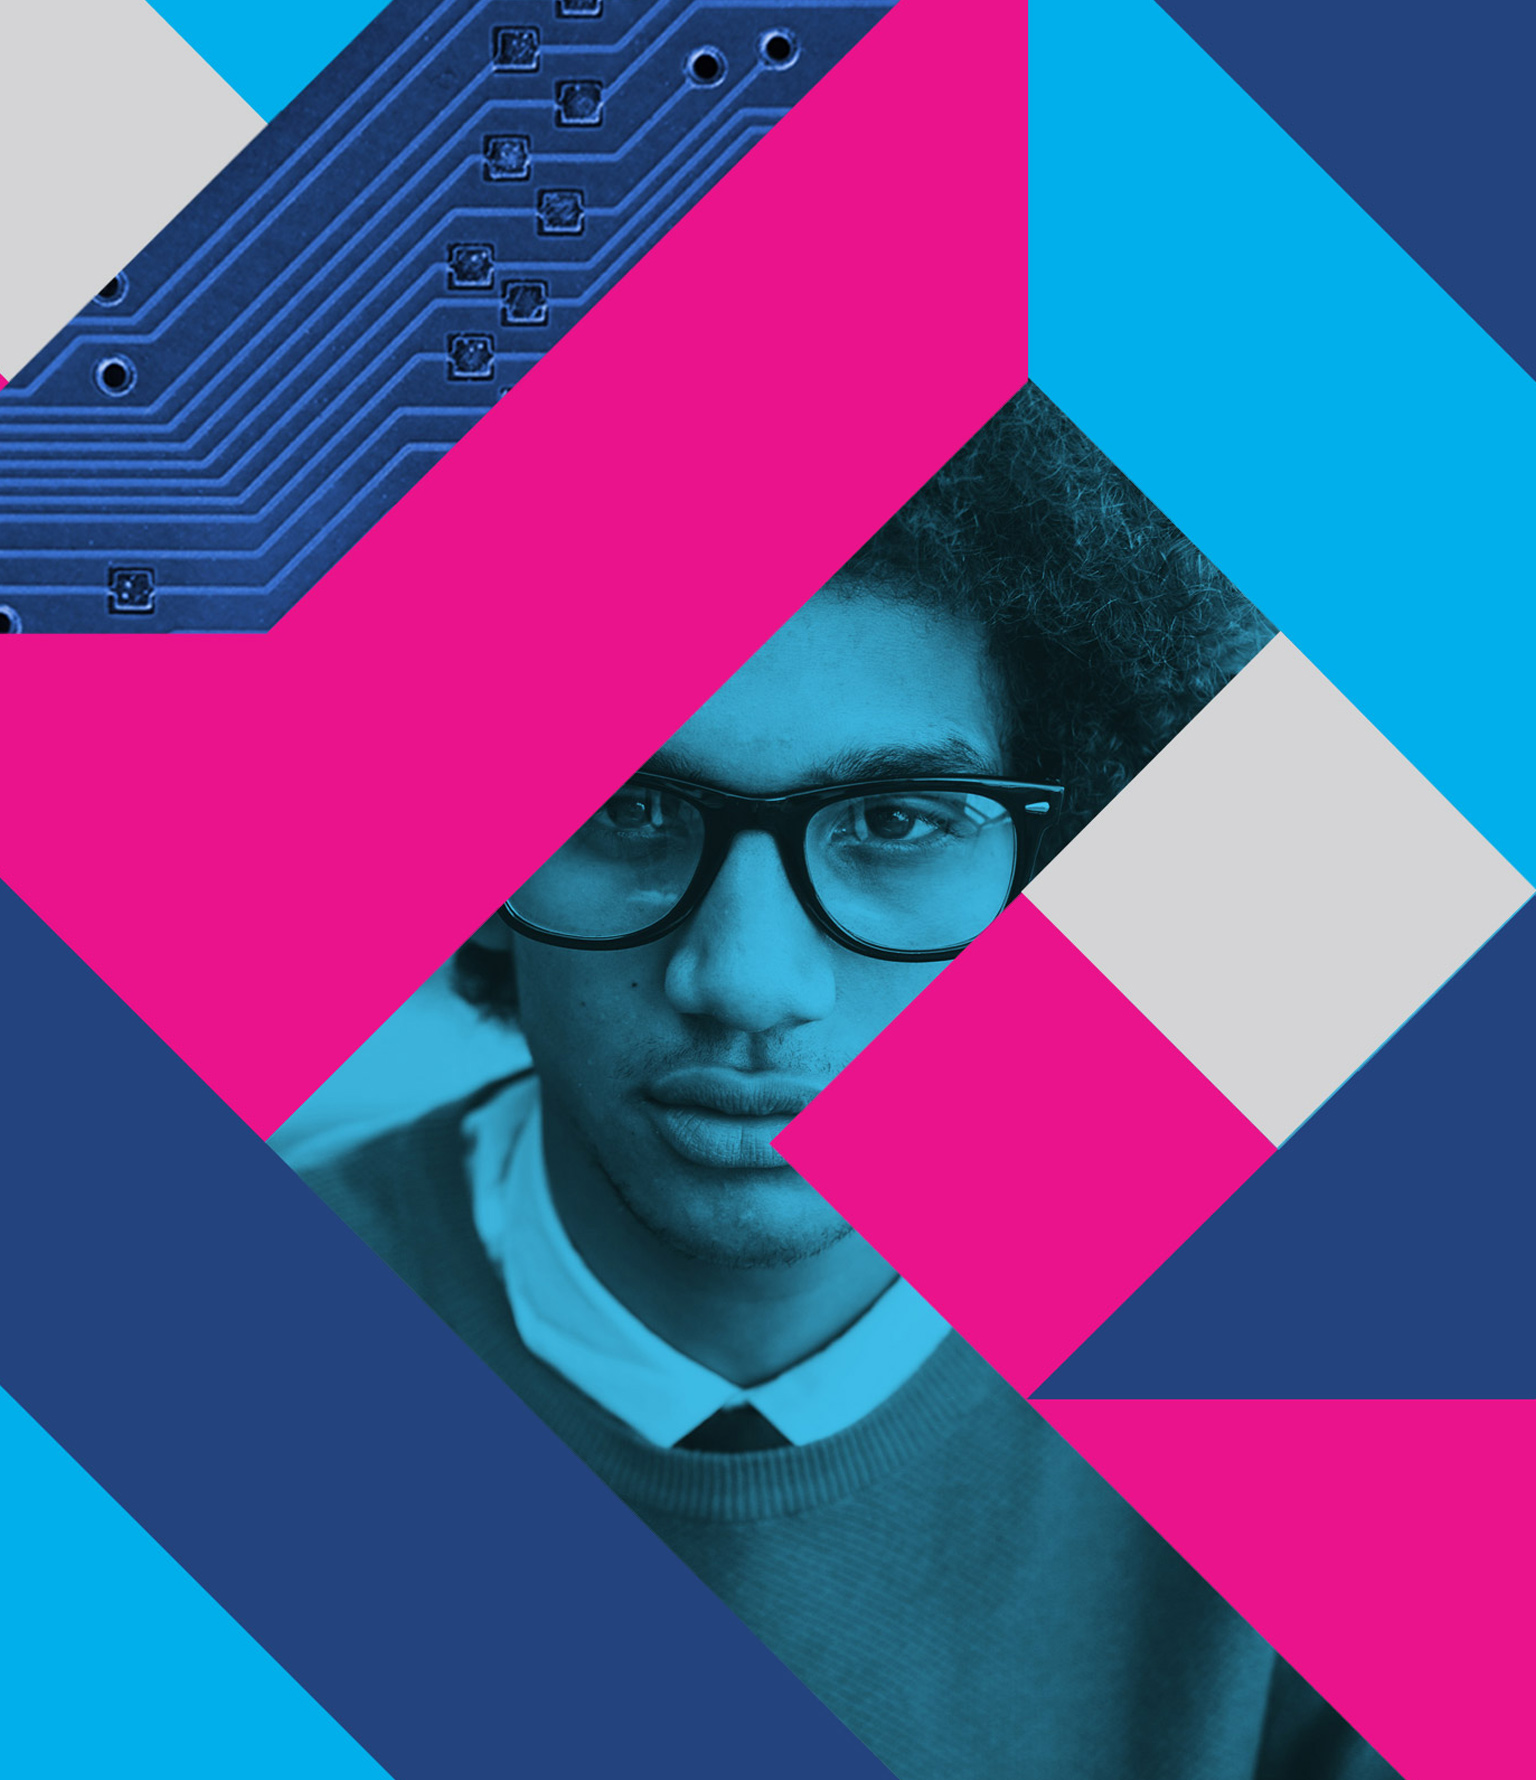 abstract digital design using angles and triangles in cyan, magenta, blue and gray with a photo of a black student inside the shapes